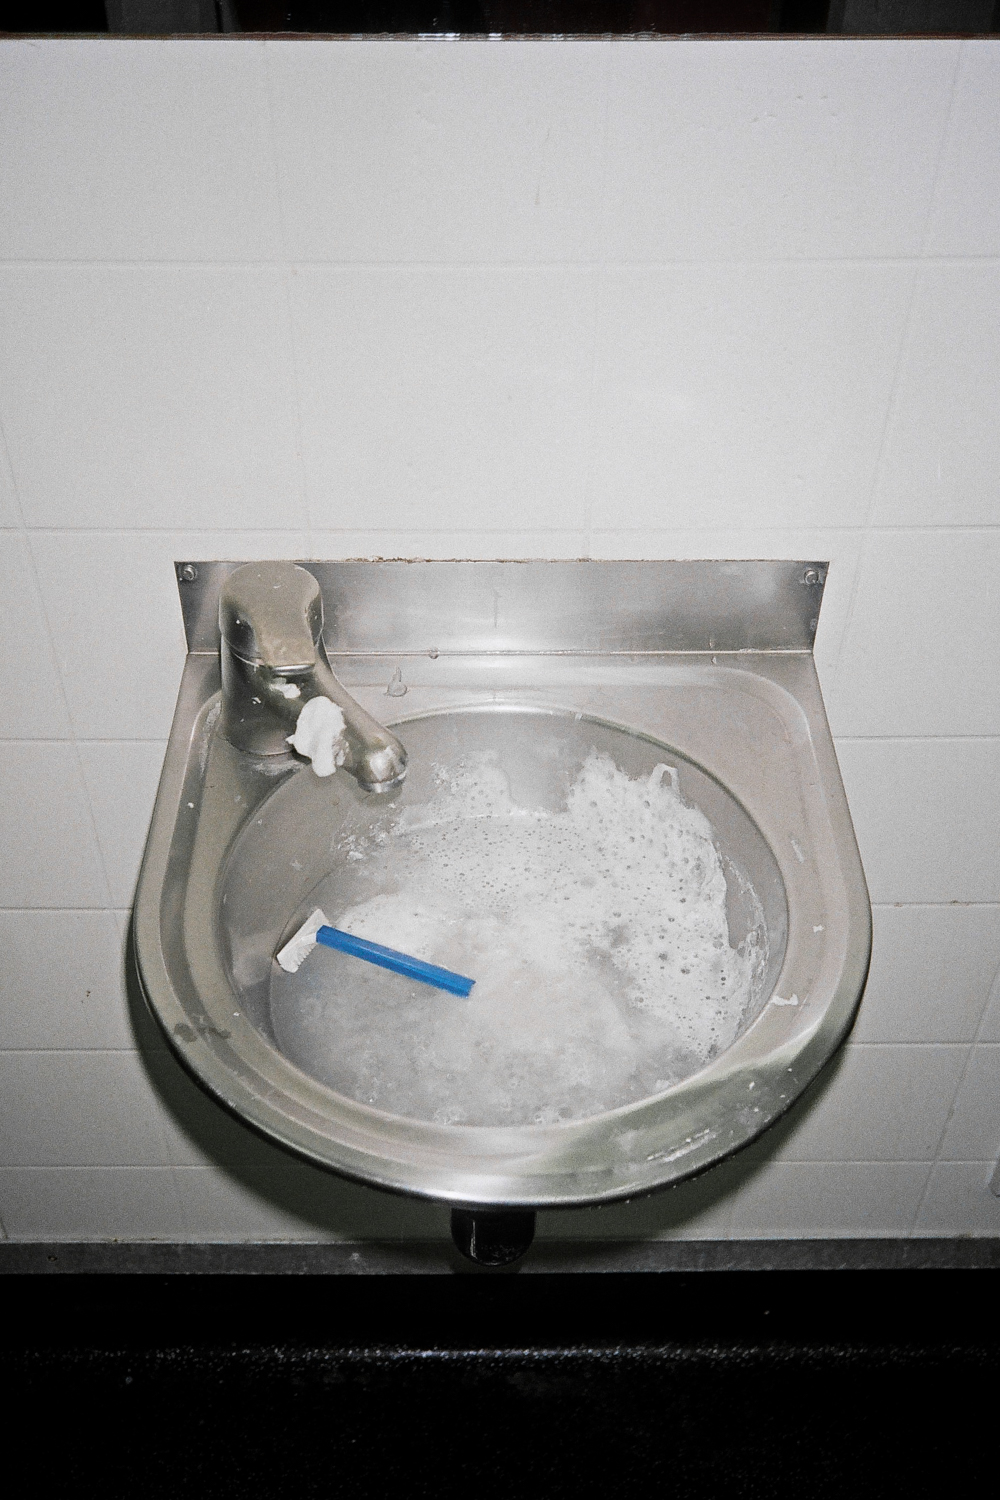  Senior Common Room bathroom sink (with disposable shaver), 2017 